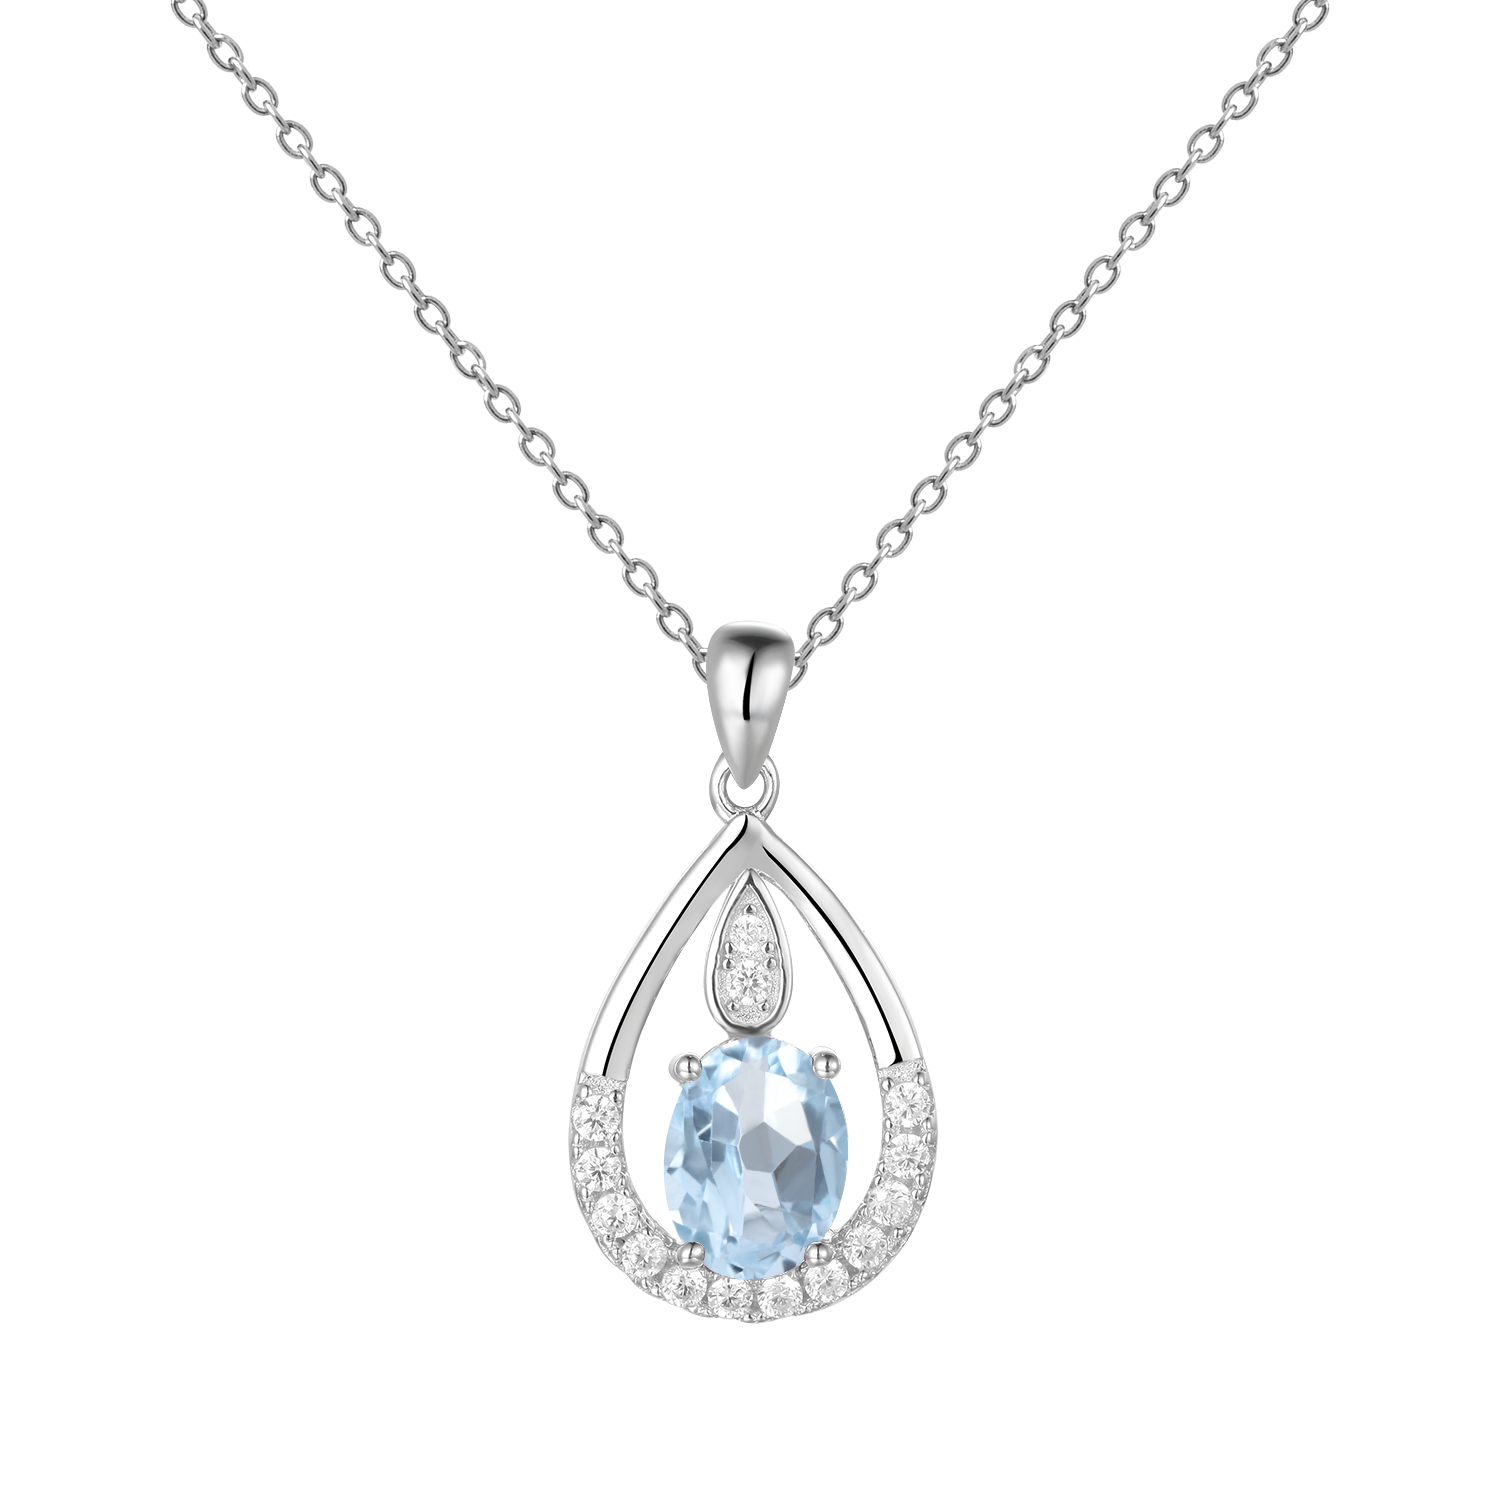 Gem&#39;s Ballet December Birthstone Topaz Necklace 6x8mm Oval Pink Topaz Pendant Necklace in 925 Sterling Silver with 18&quot; Chain Sky Blue Topaz